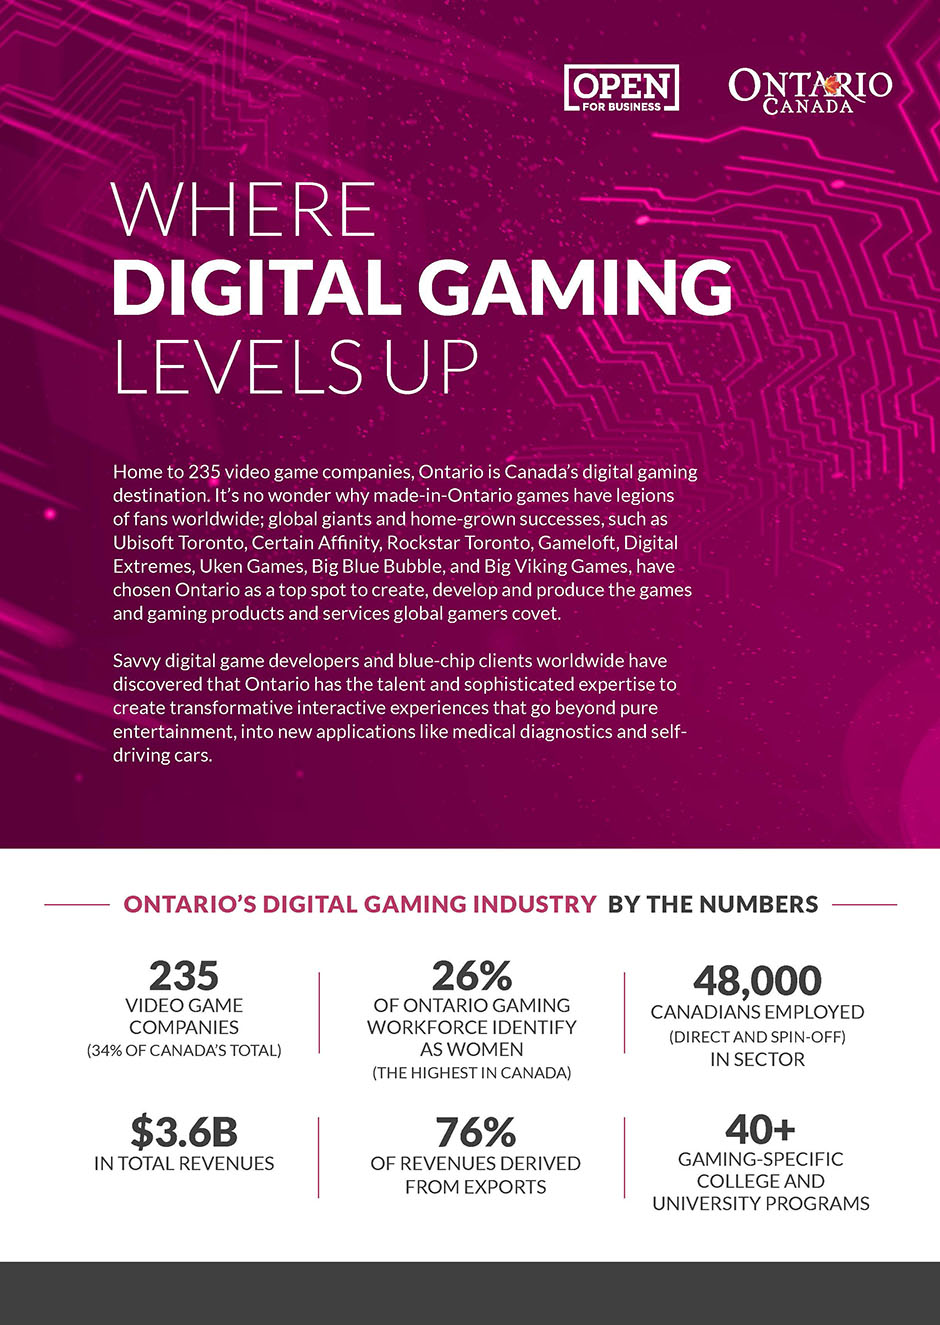 Where digital gaming levels up